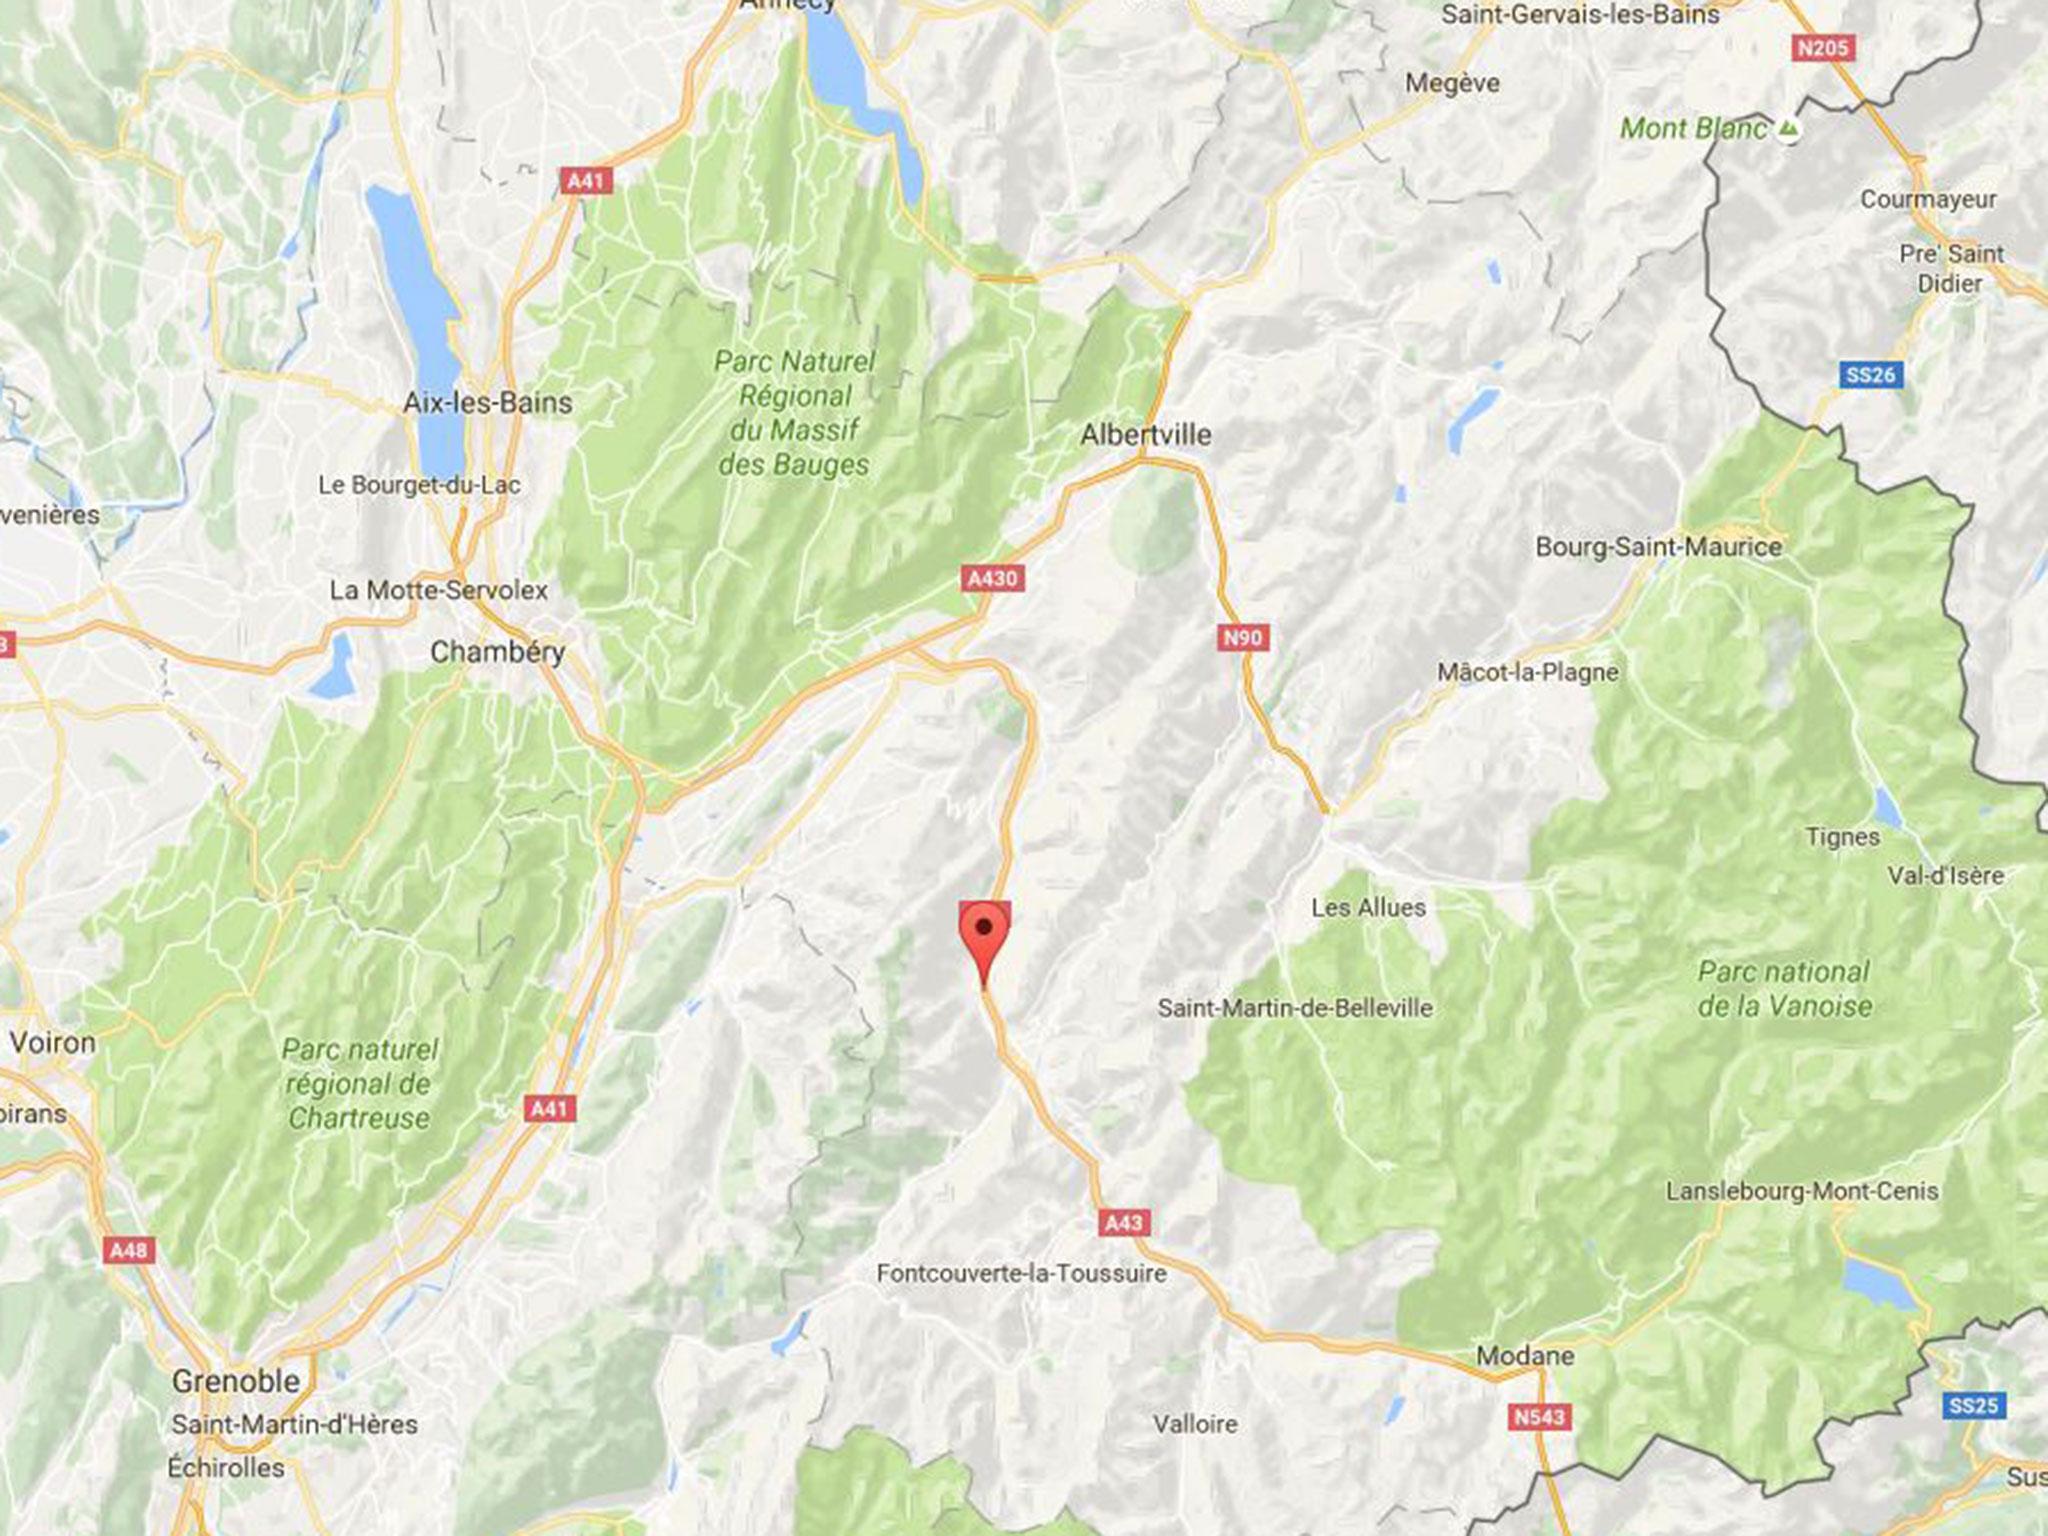 The two-seater plane crashed around 7.30 local time on the outskirts of Saint-Remy-de-Maurienne, Savoy, France